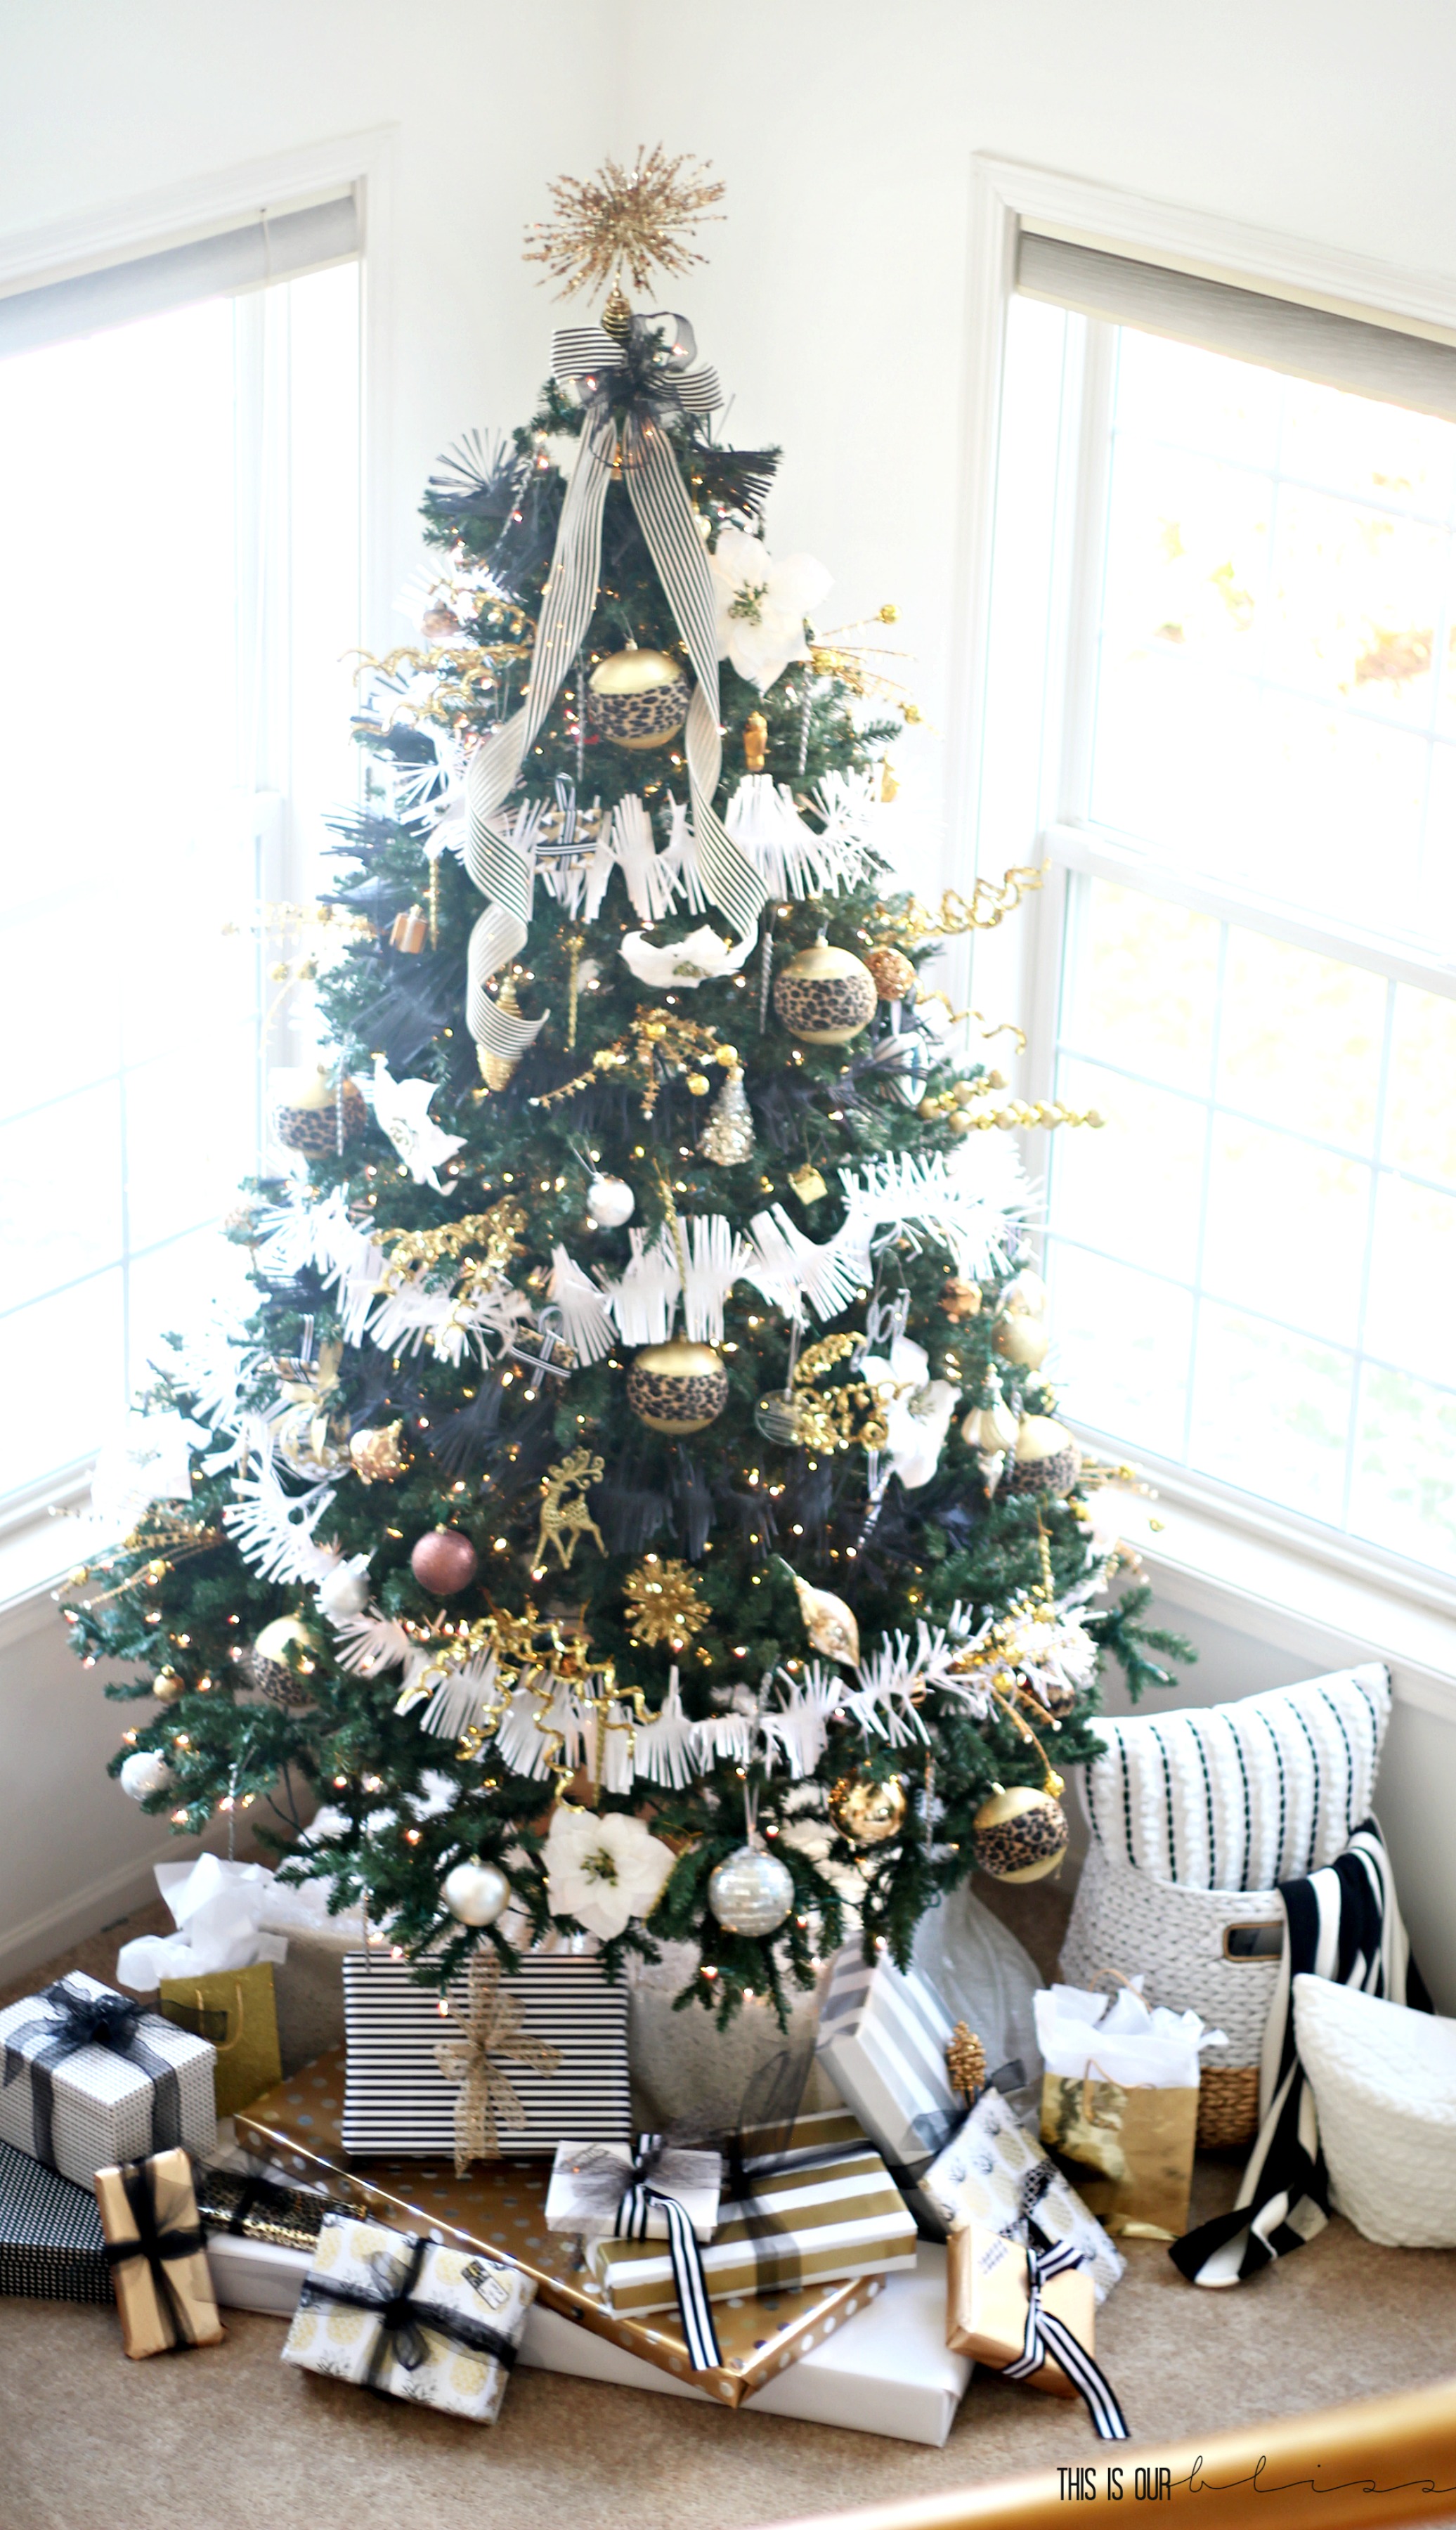 My Silver, White, and Gold Feather Adorned Tree - Cassie Bustamante